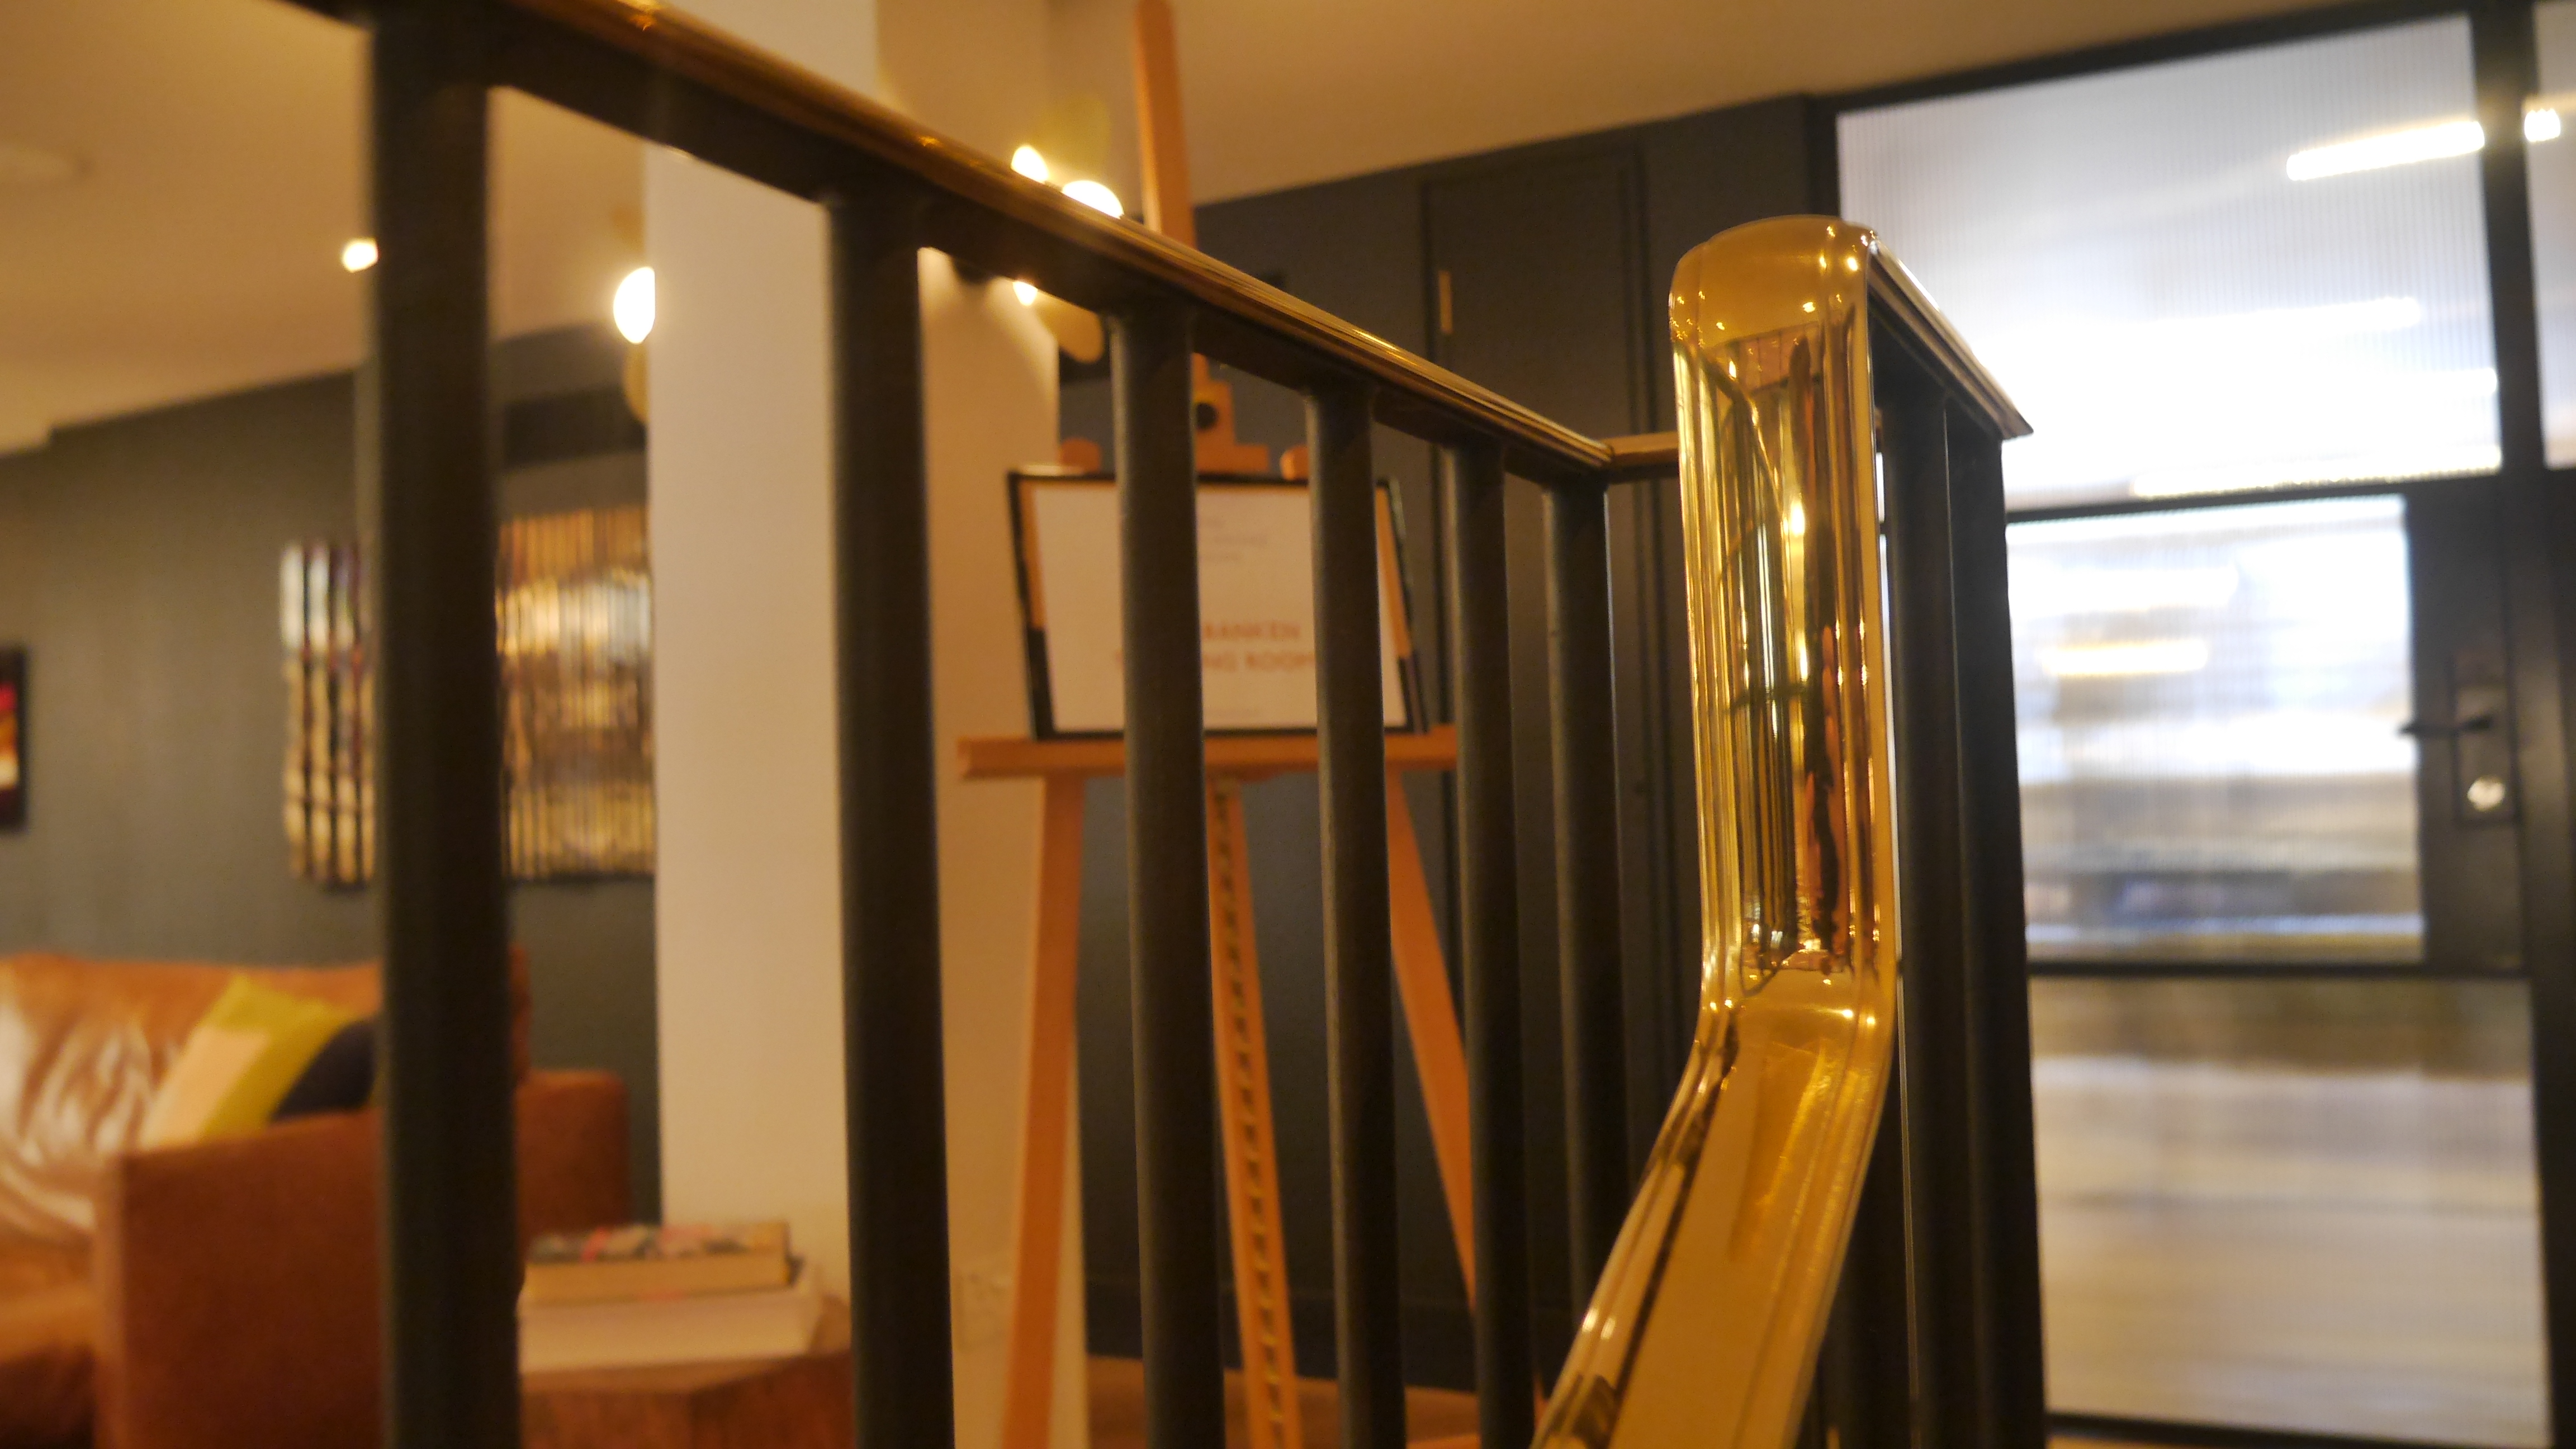 Bespoke Steel and Brass Staircase balustrade for a Hotel in London.